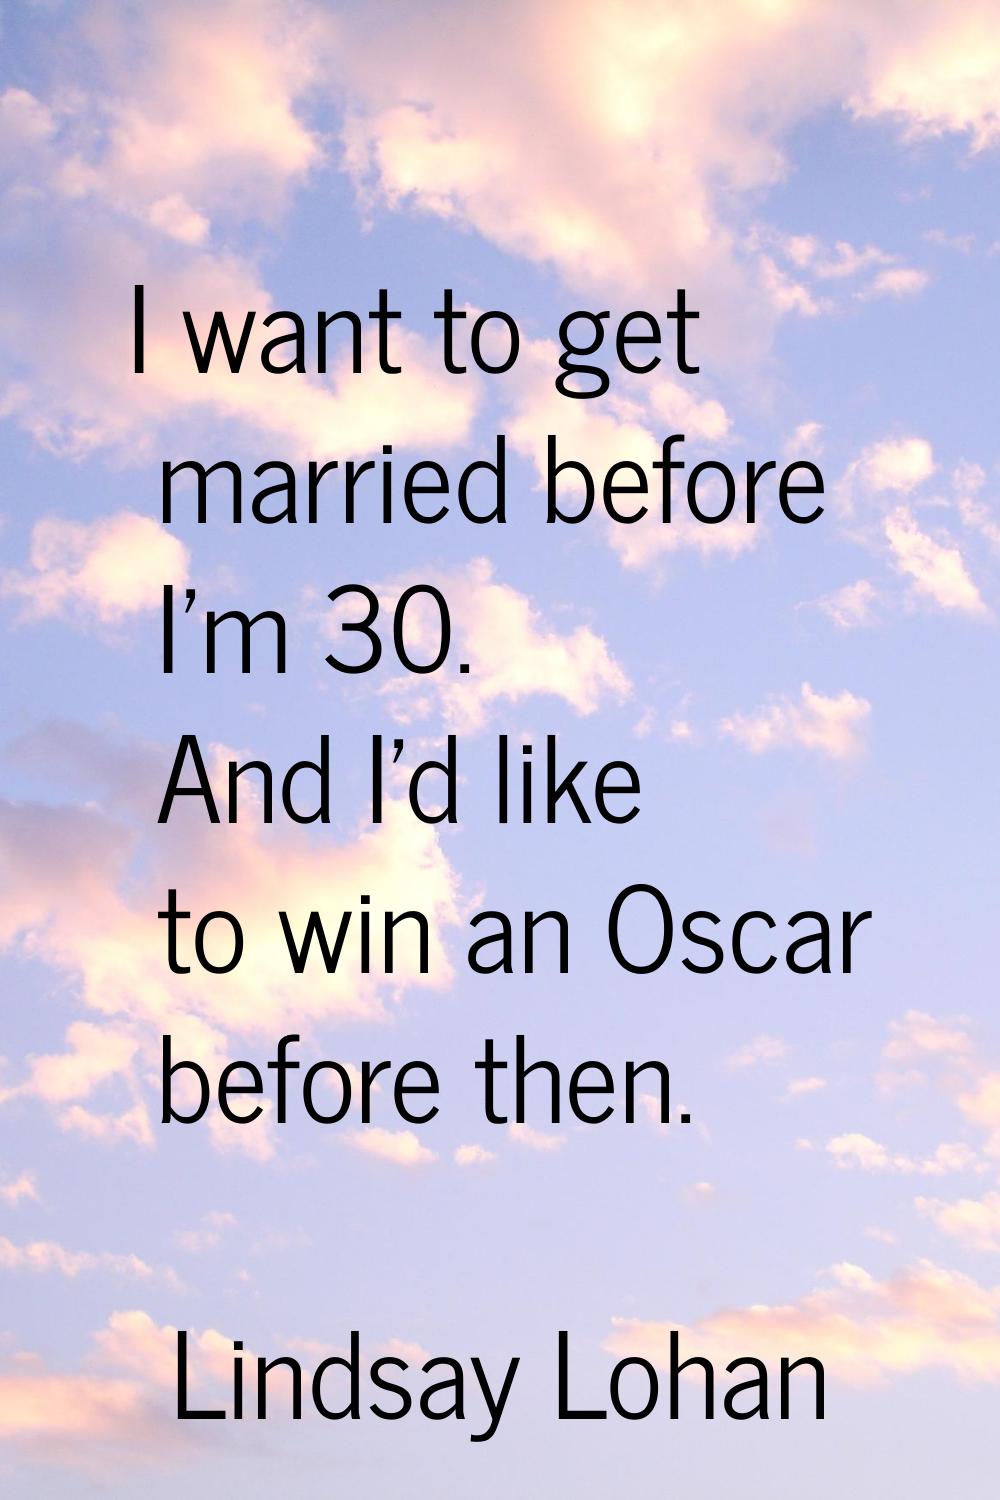 I want to get married before I'm 30. And I'd like to win an Oscar before then.